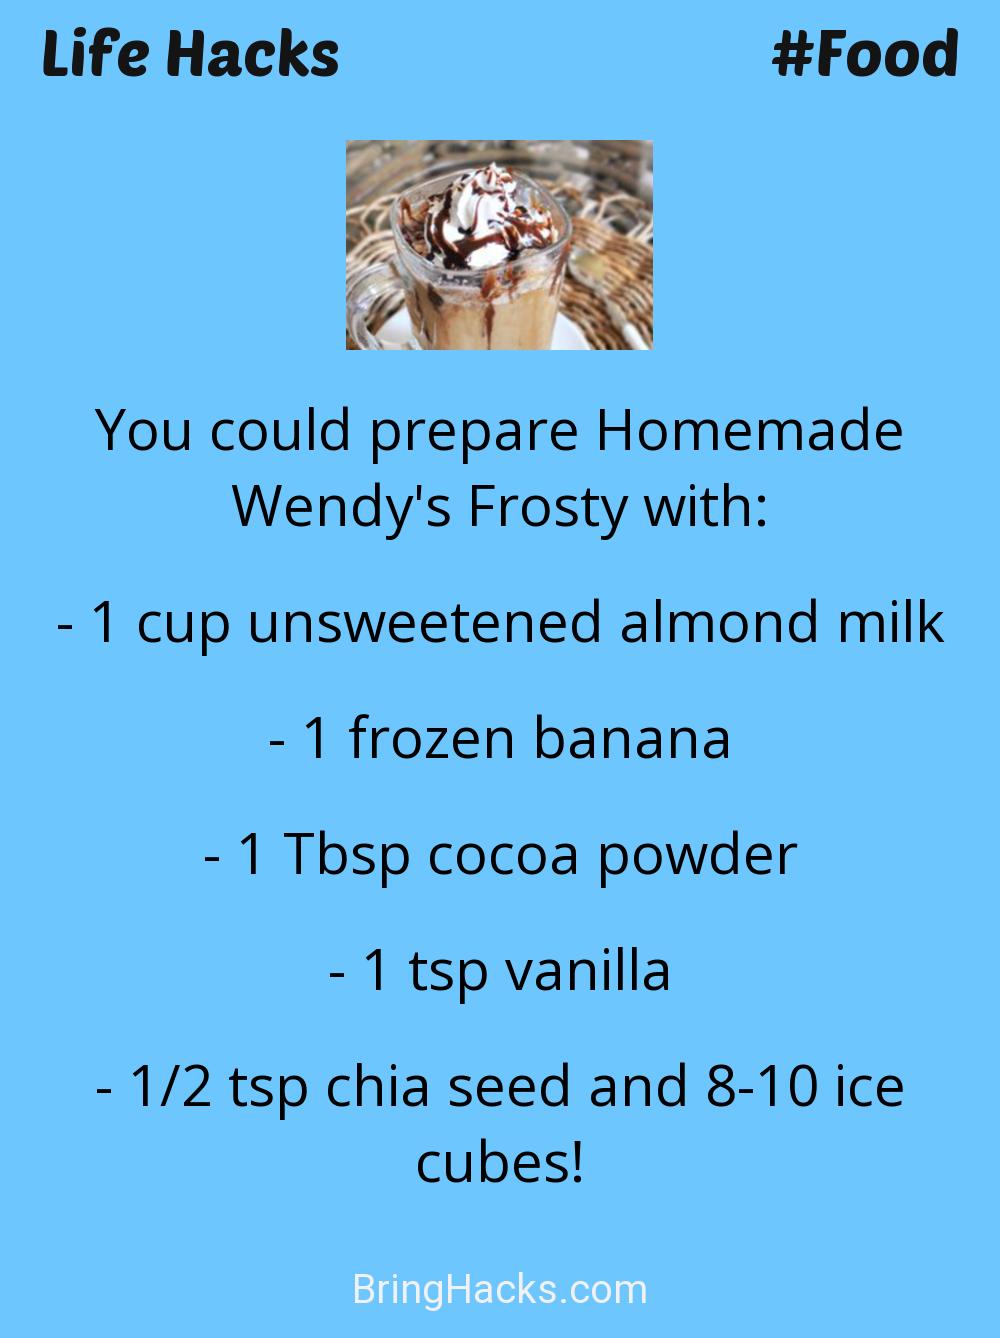 Life Hacks: - You could prepare Homemade Wendy's Frosty with:
1 cup unsweetened almond milk1 frozen banana1 Tbsp cocoa powder1 tsp vanilla1/2 tsp chia seed and 8-10 ice cubes!